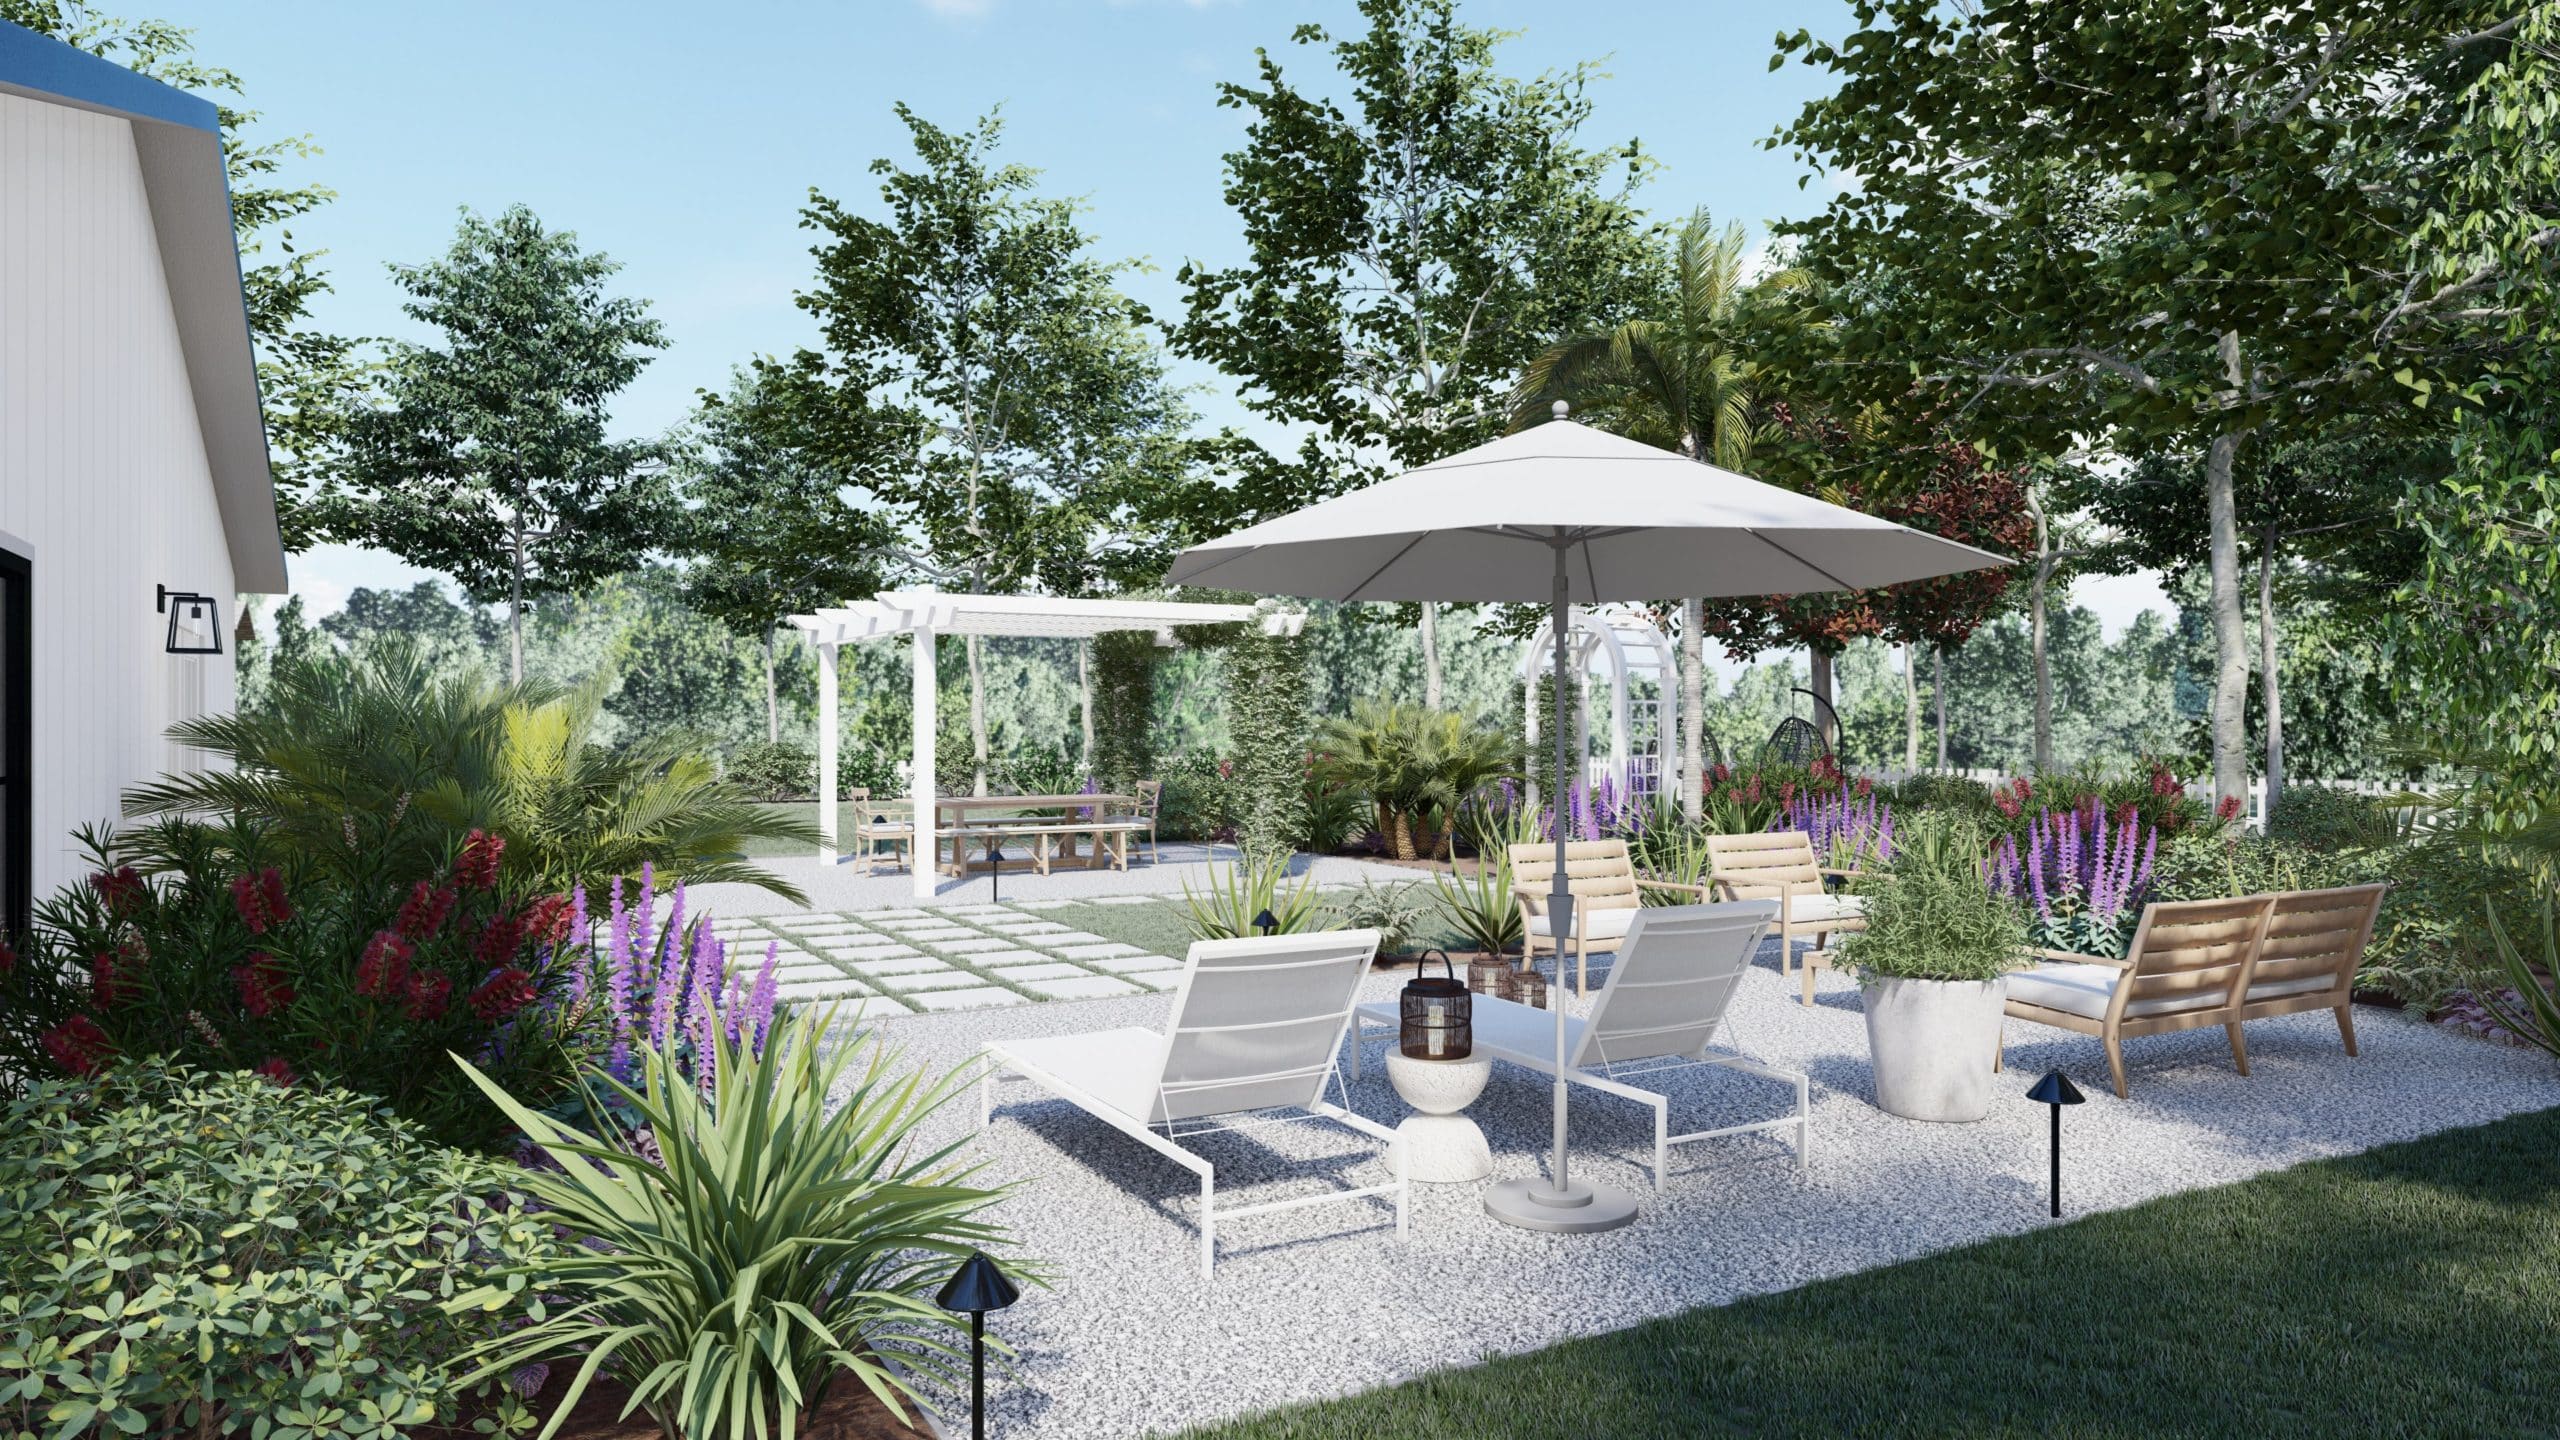 3D render of backyard design with lounge chairs, outdoor umbrella, and dining area in background